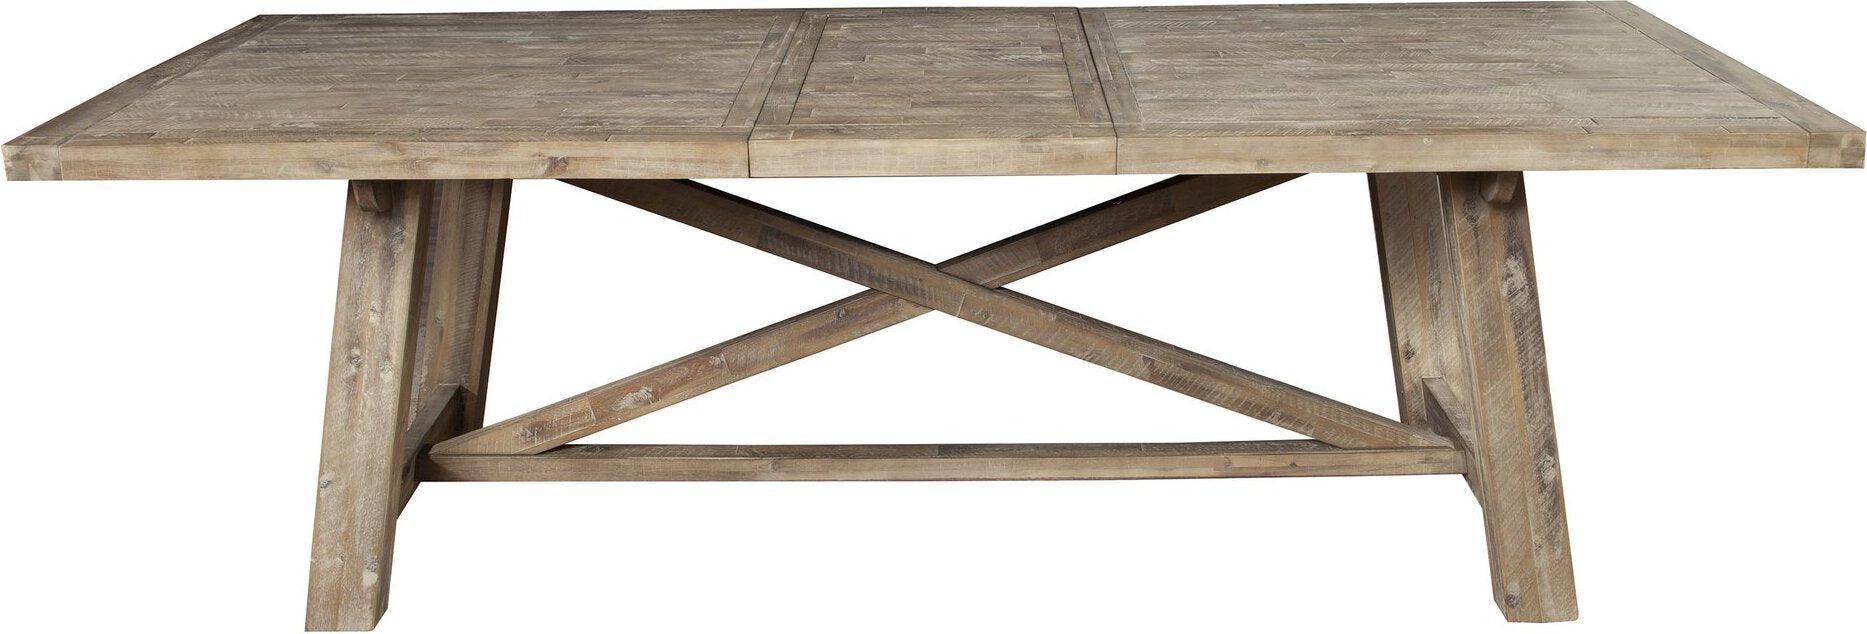 Alpine Furniture Dining Tables - Newberry Extension Dining Table Weathered Natural